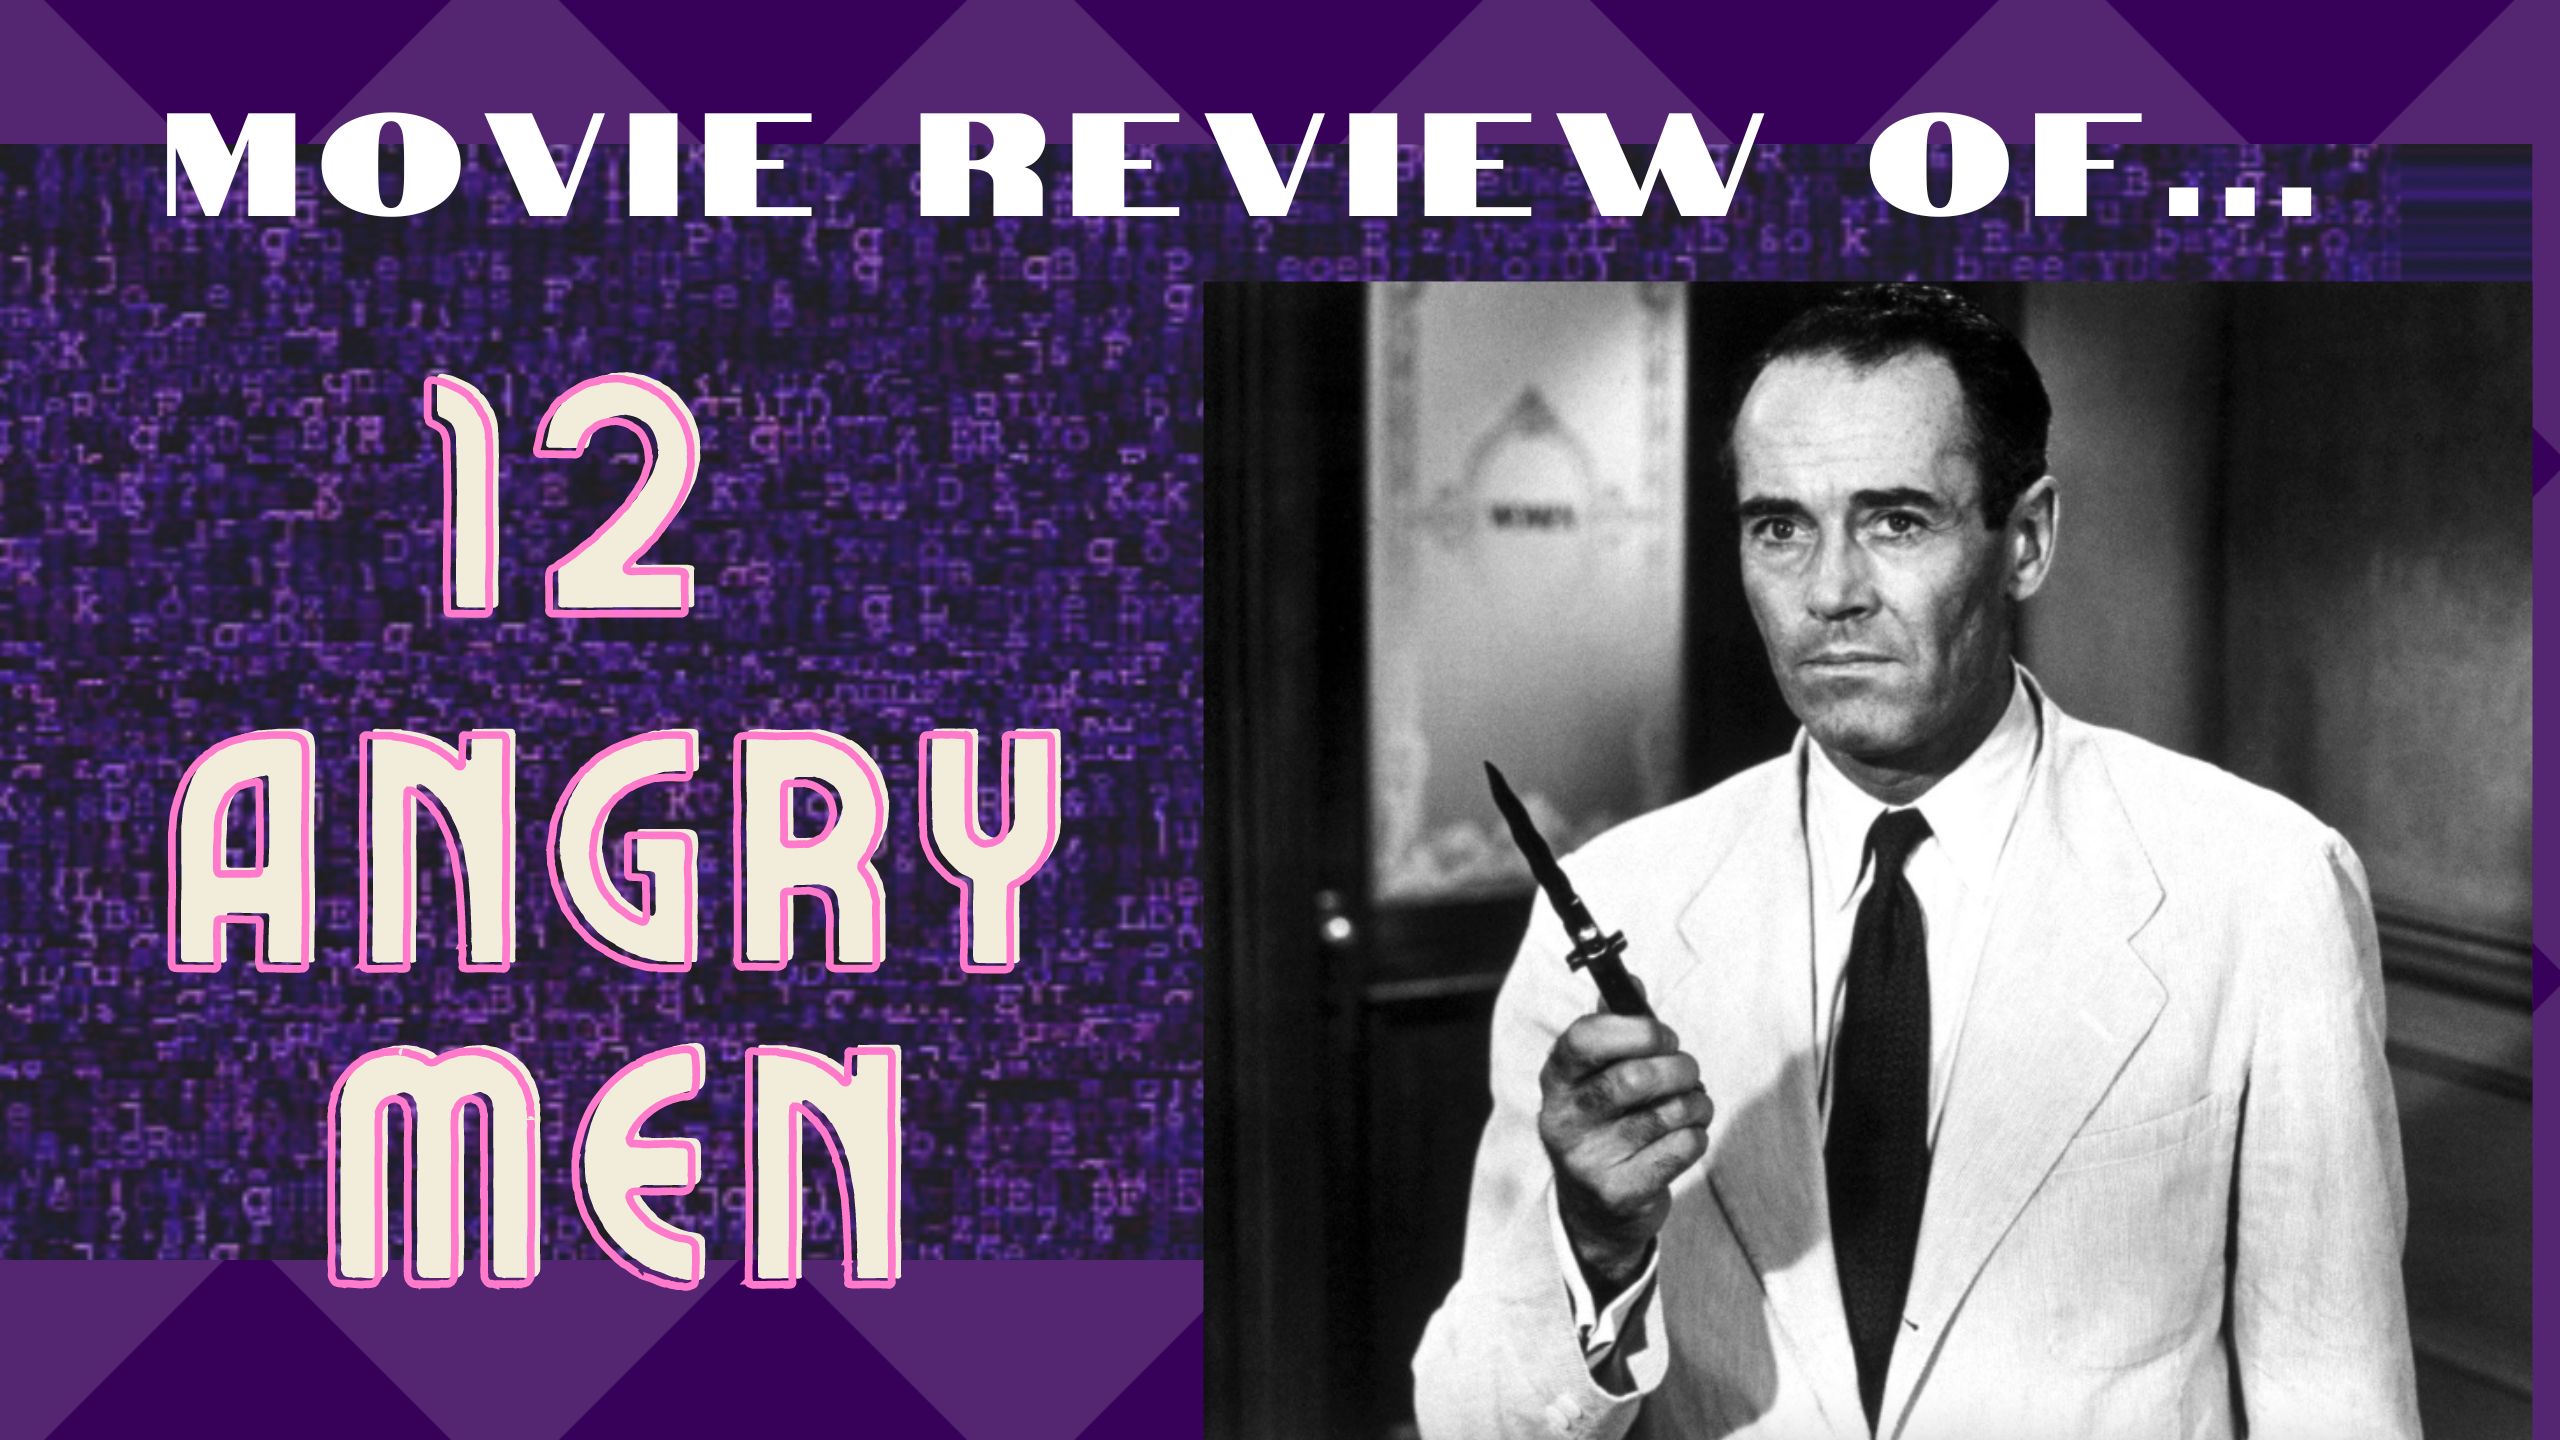 MOVIE REVIEW OF ’12 ANGRY MEN’ (1957)